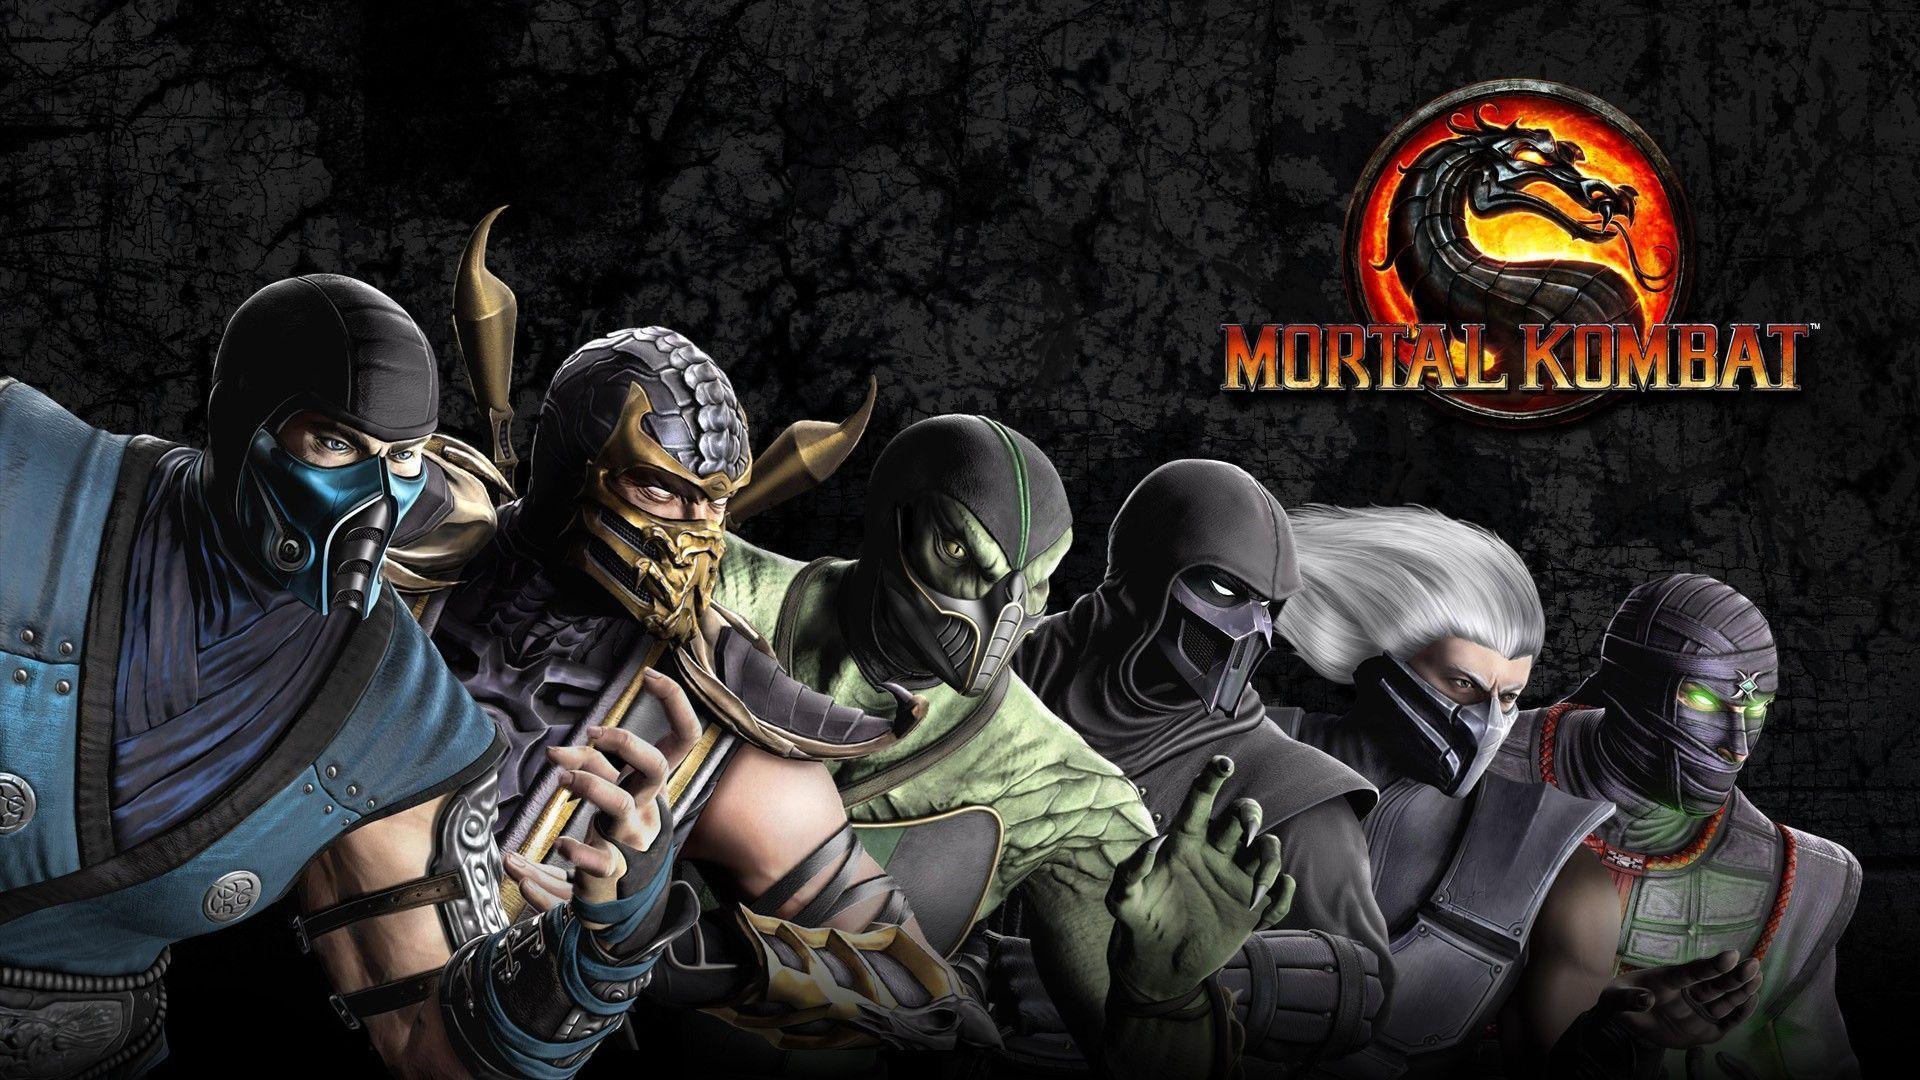 Free Download Mortal Kombat Game Characters Wallpapers in 1920x1080